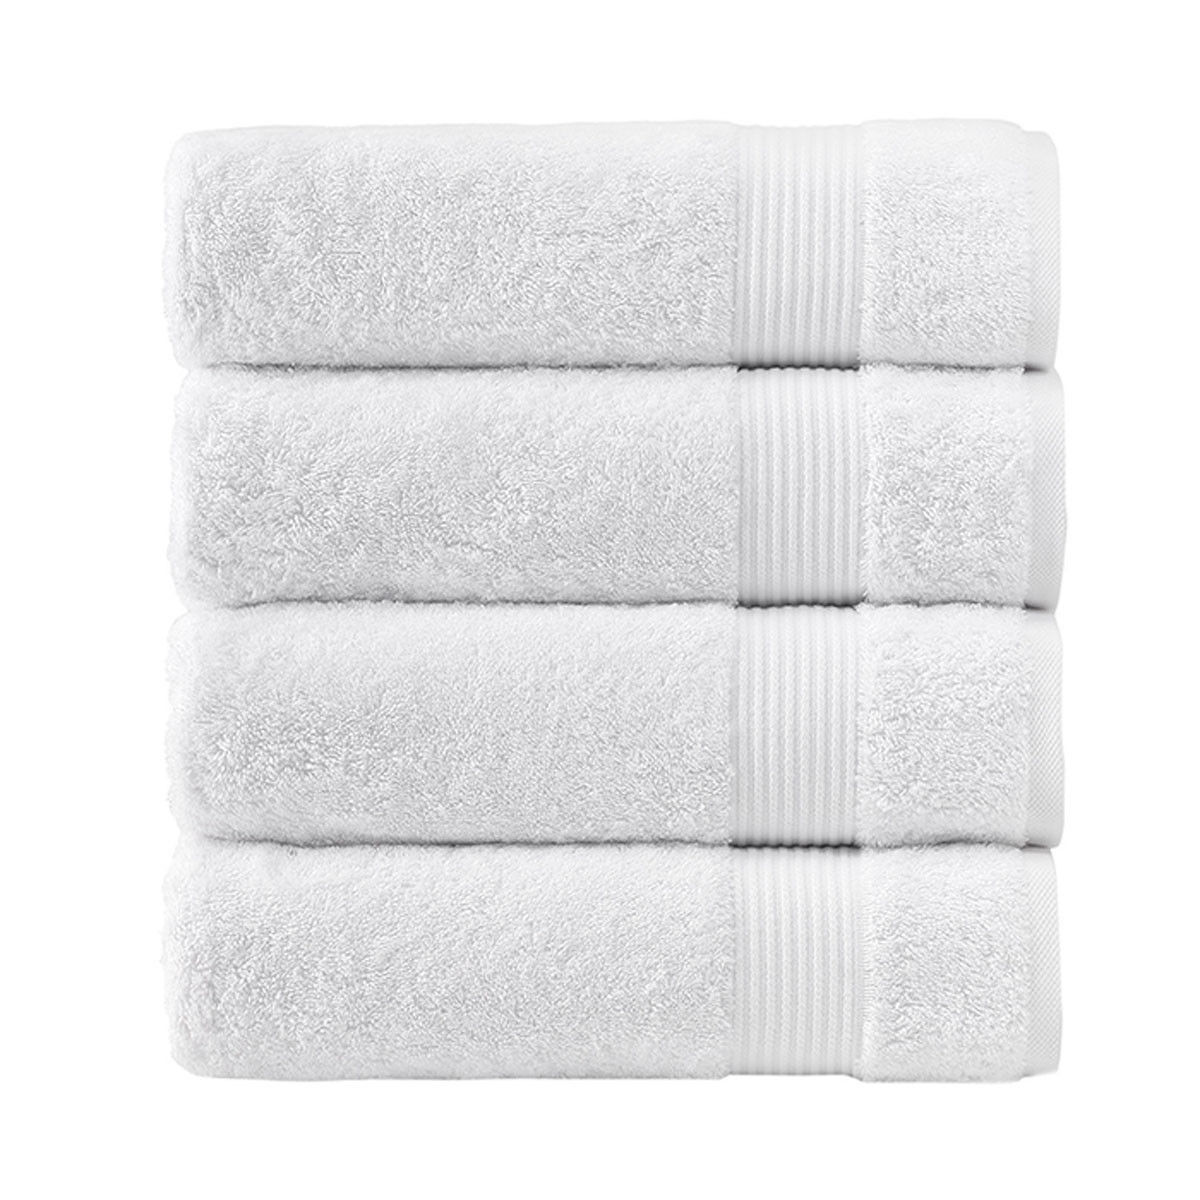 Amadeus Turkish White Towel Collection Questions & Answers